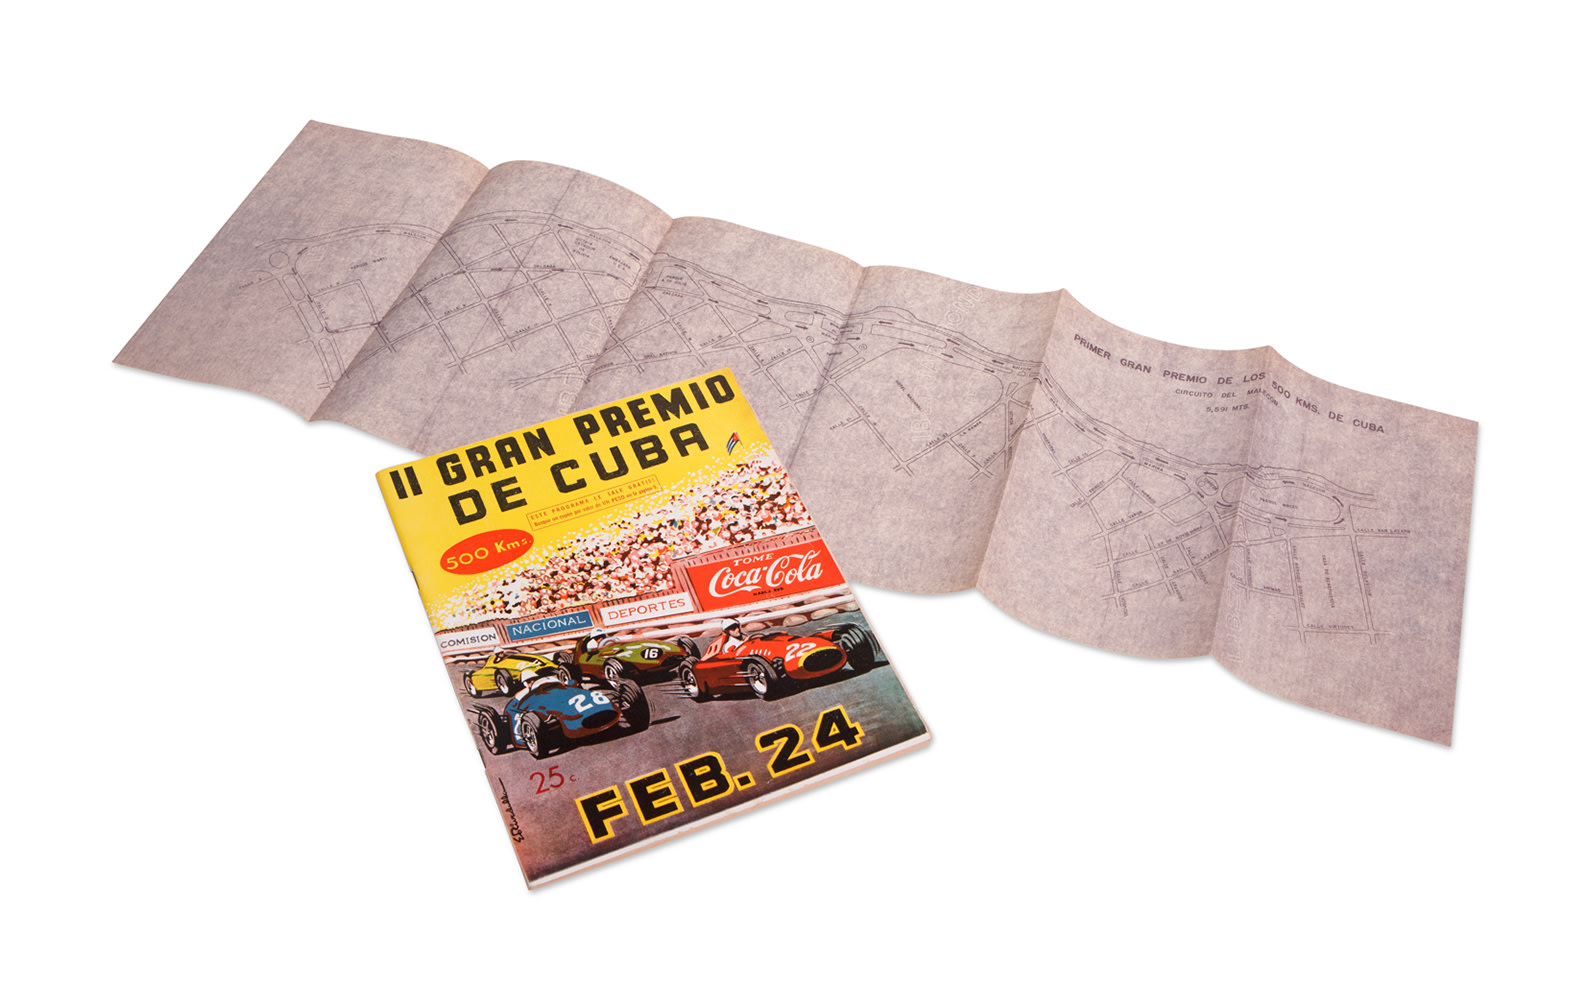 1958 Grand Prix of Cuba Official Race Program, Entry List, and Course Map